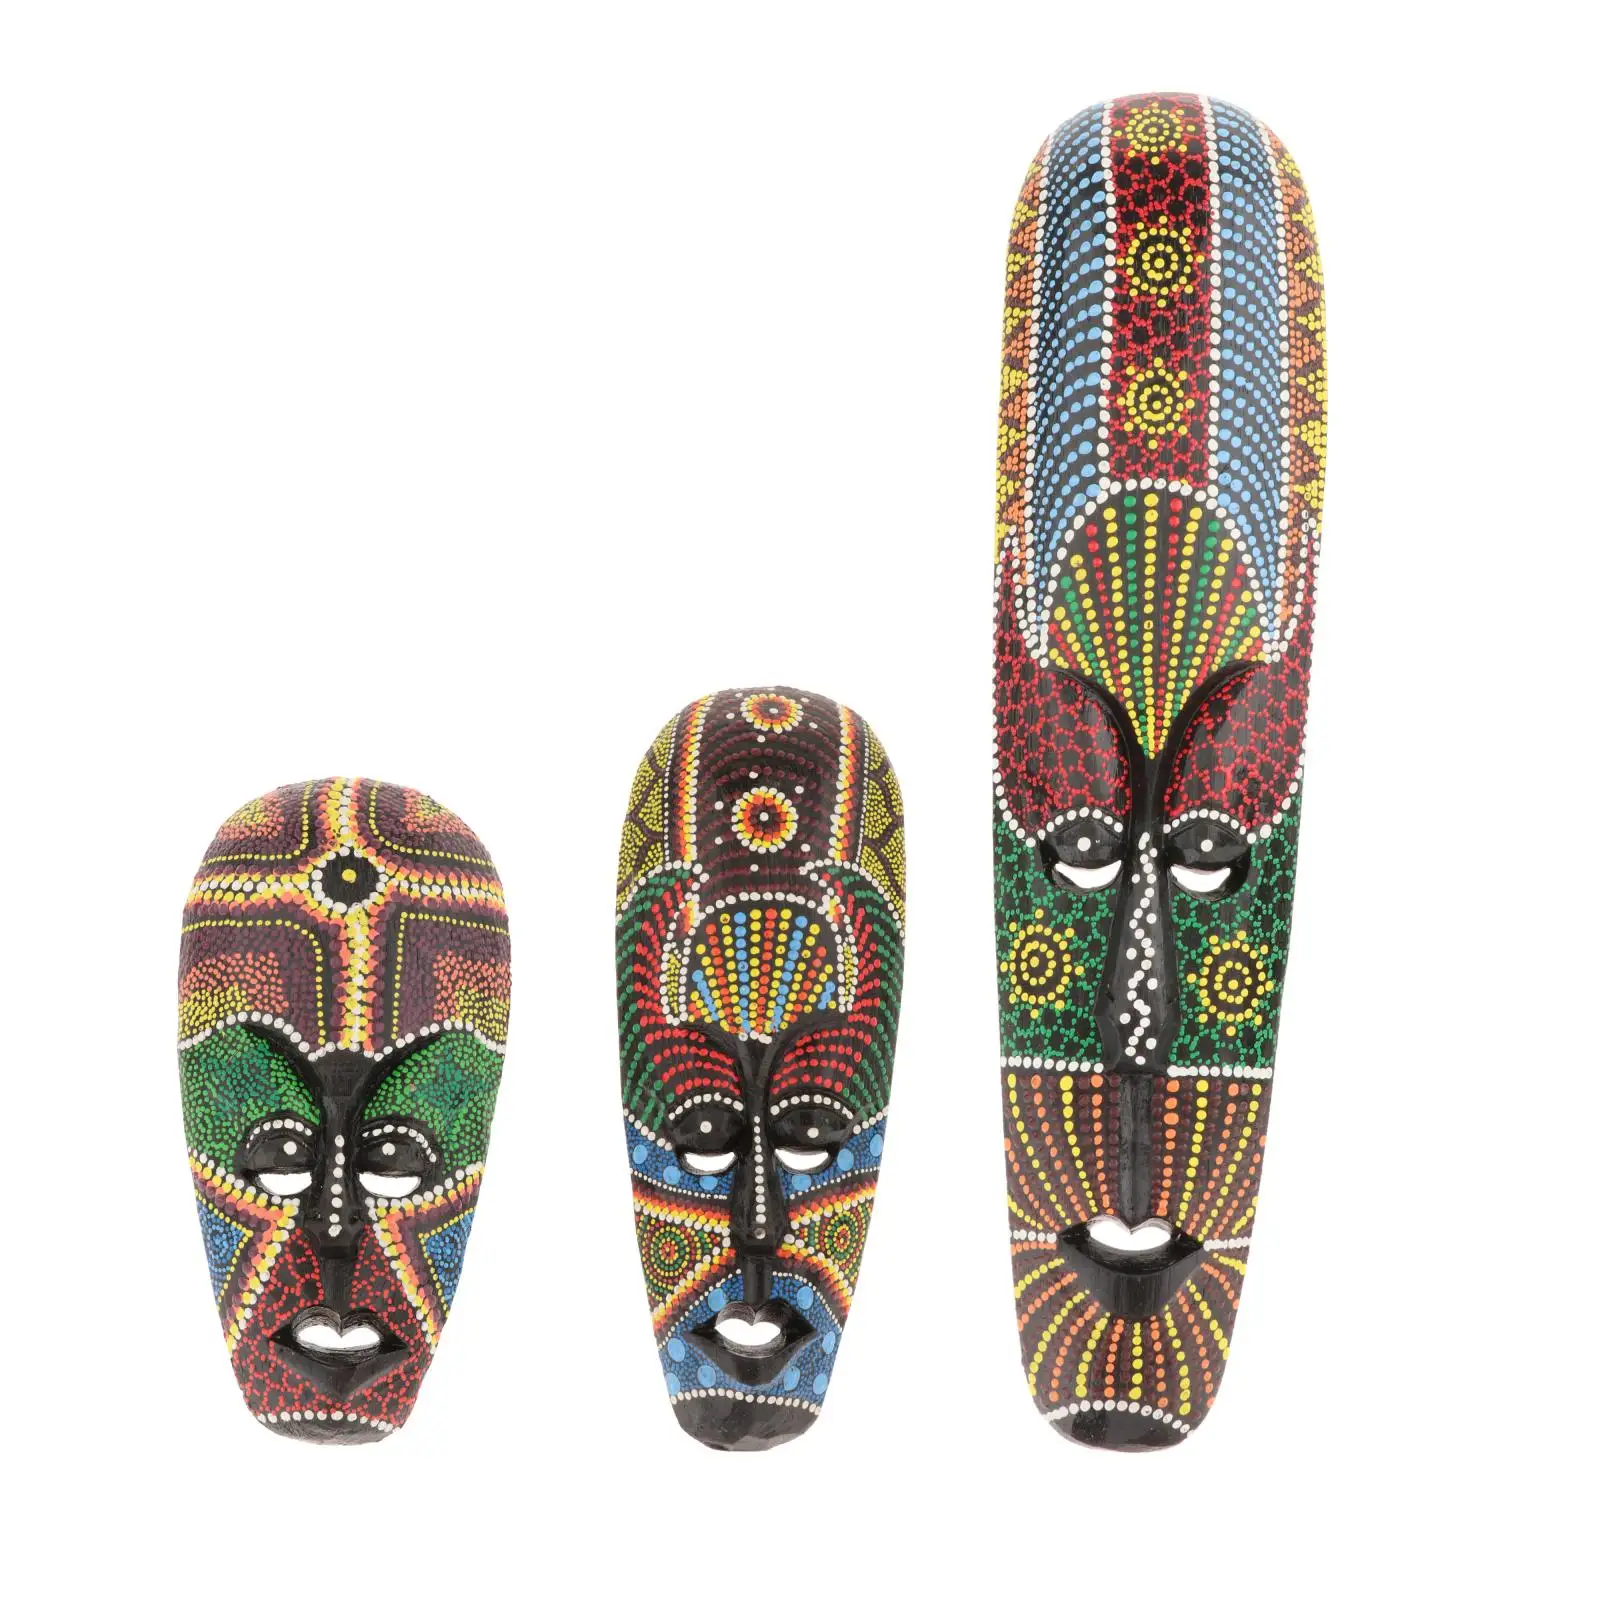 Wooden African Hand Carved Tribal Face Mask Painting Wall Hanging Folk Art